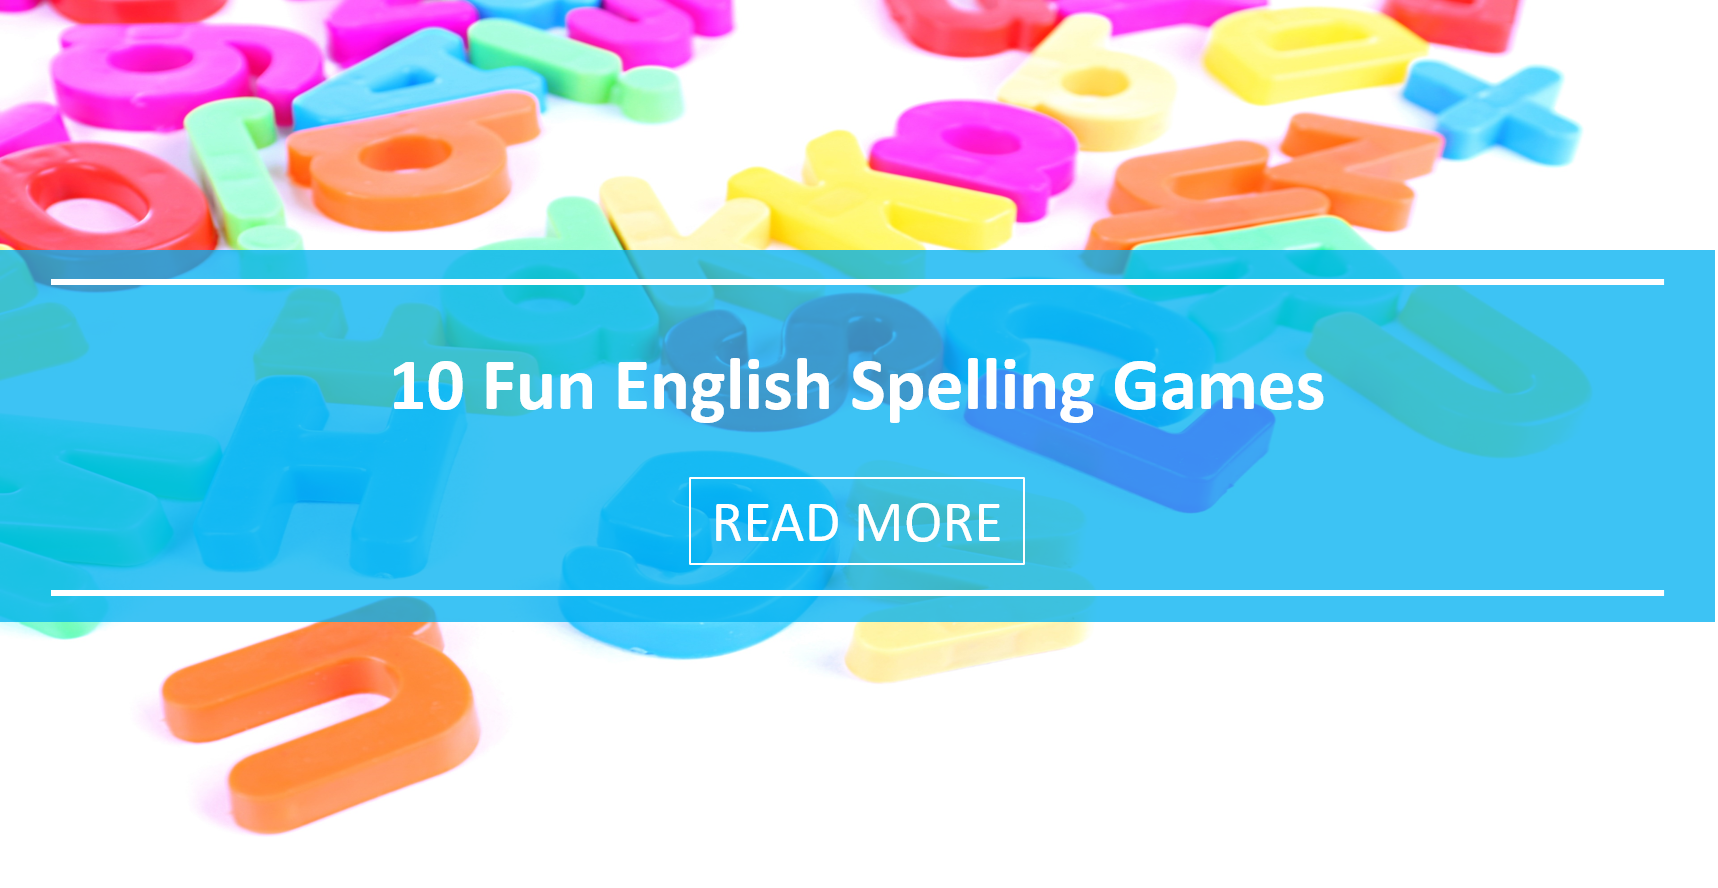 10 Fun English Spelling Games for Your Students